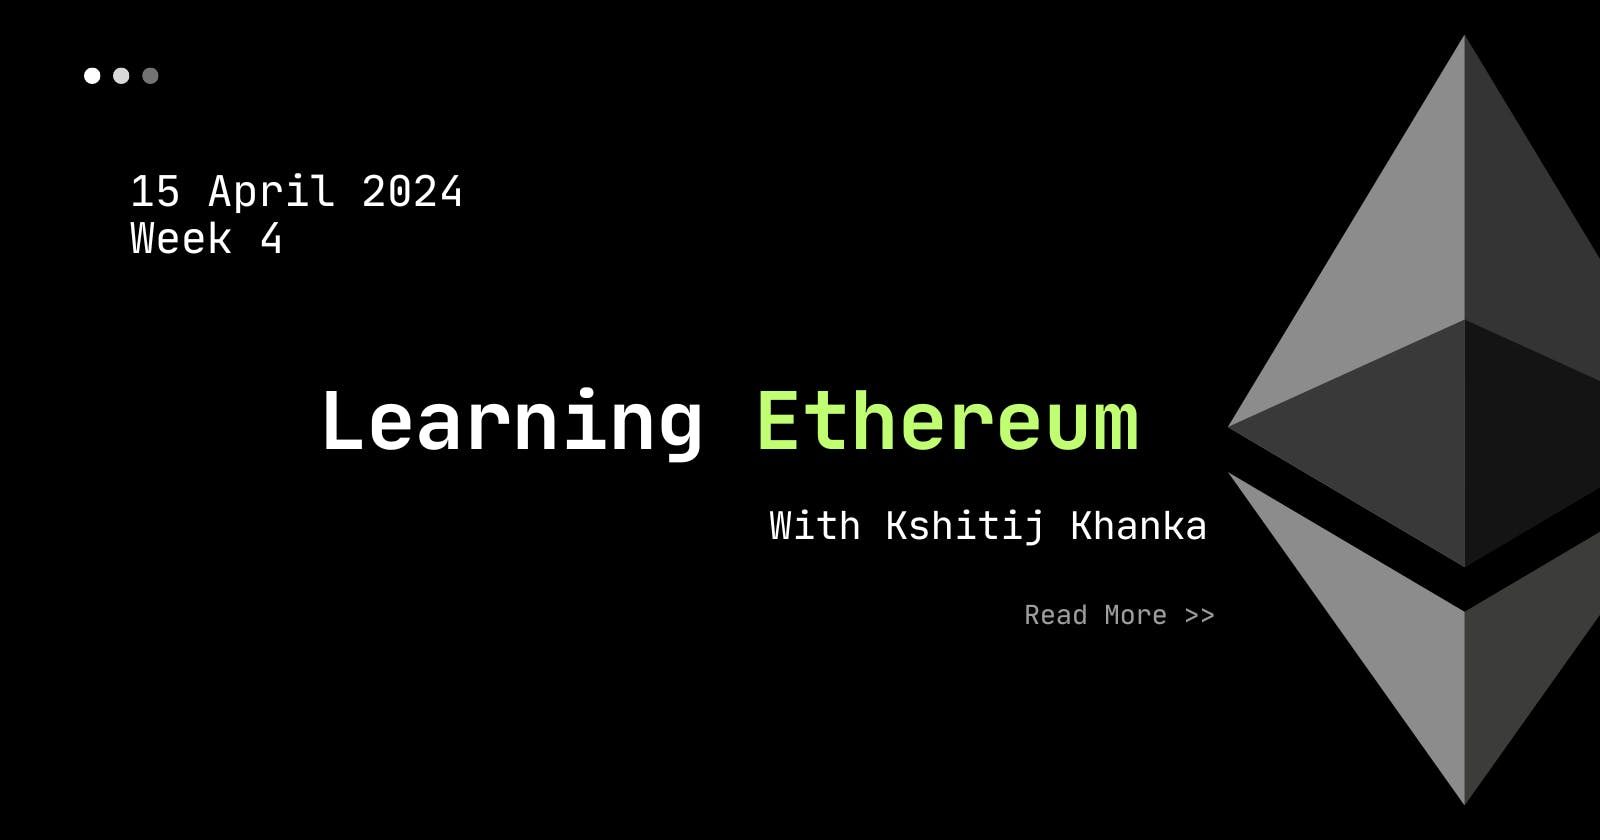 Deep Dive in to Ethereum — Week 4 of Learning .